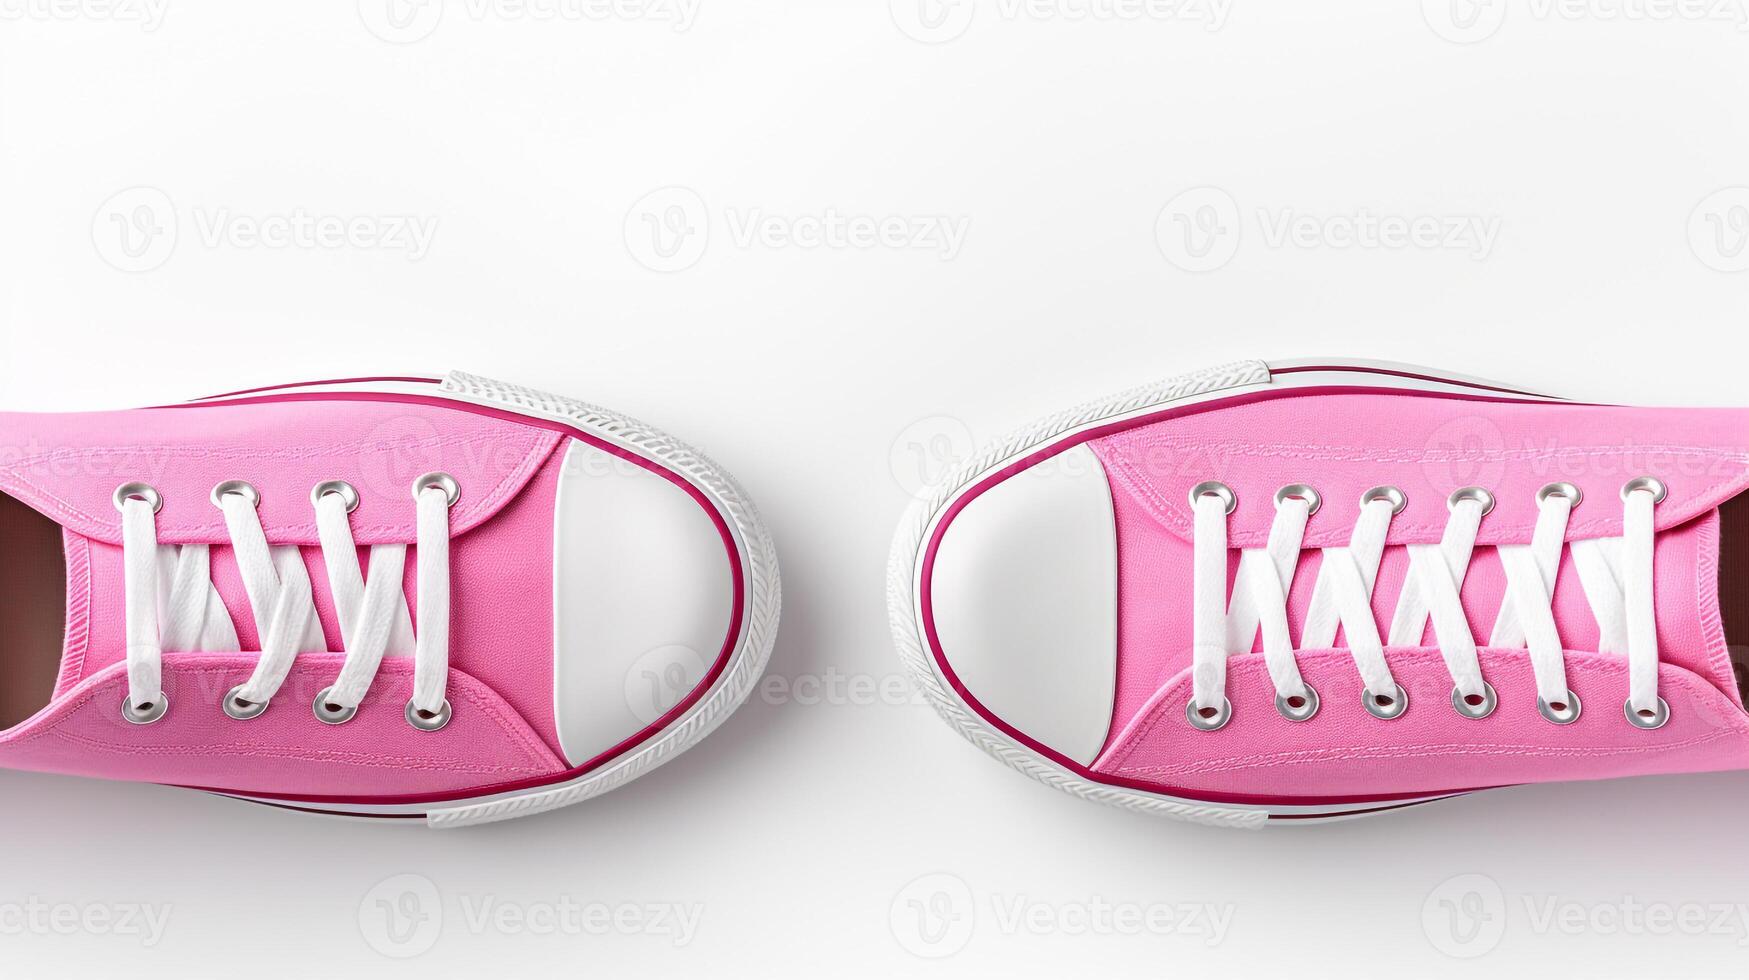 AI generated Pink Sneakers shoes isolated on white background with copy space for advertisement. Generative AI photo